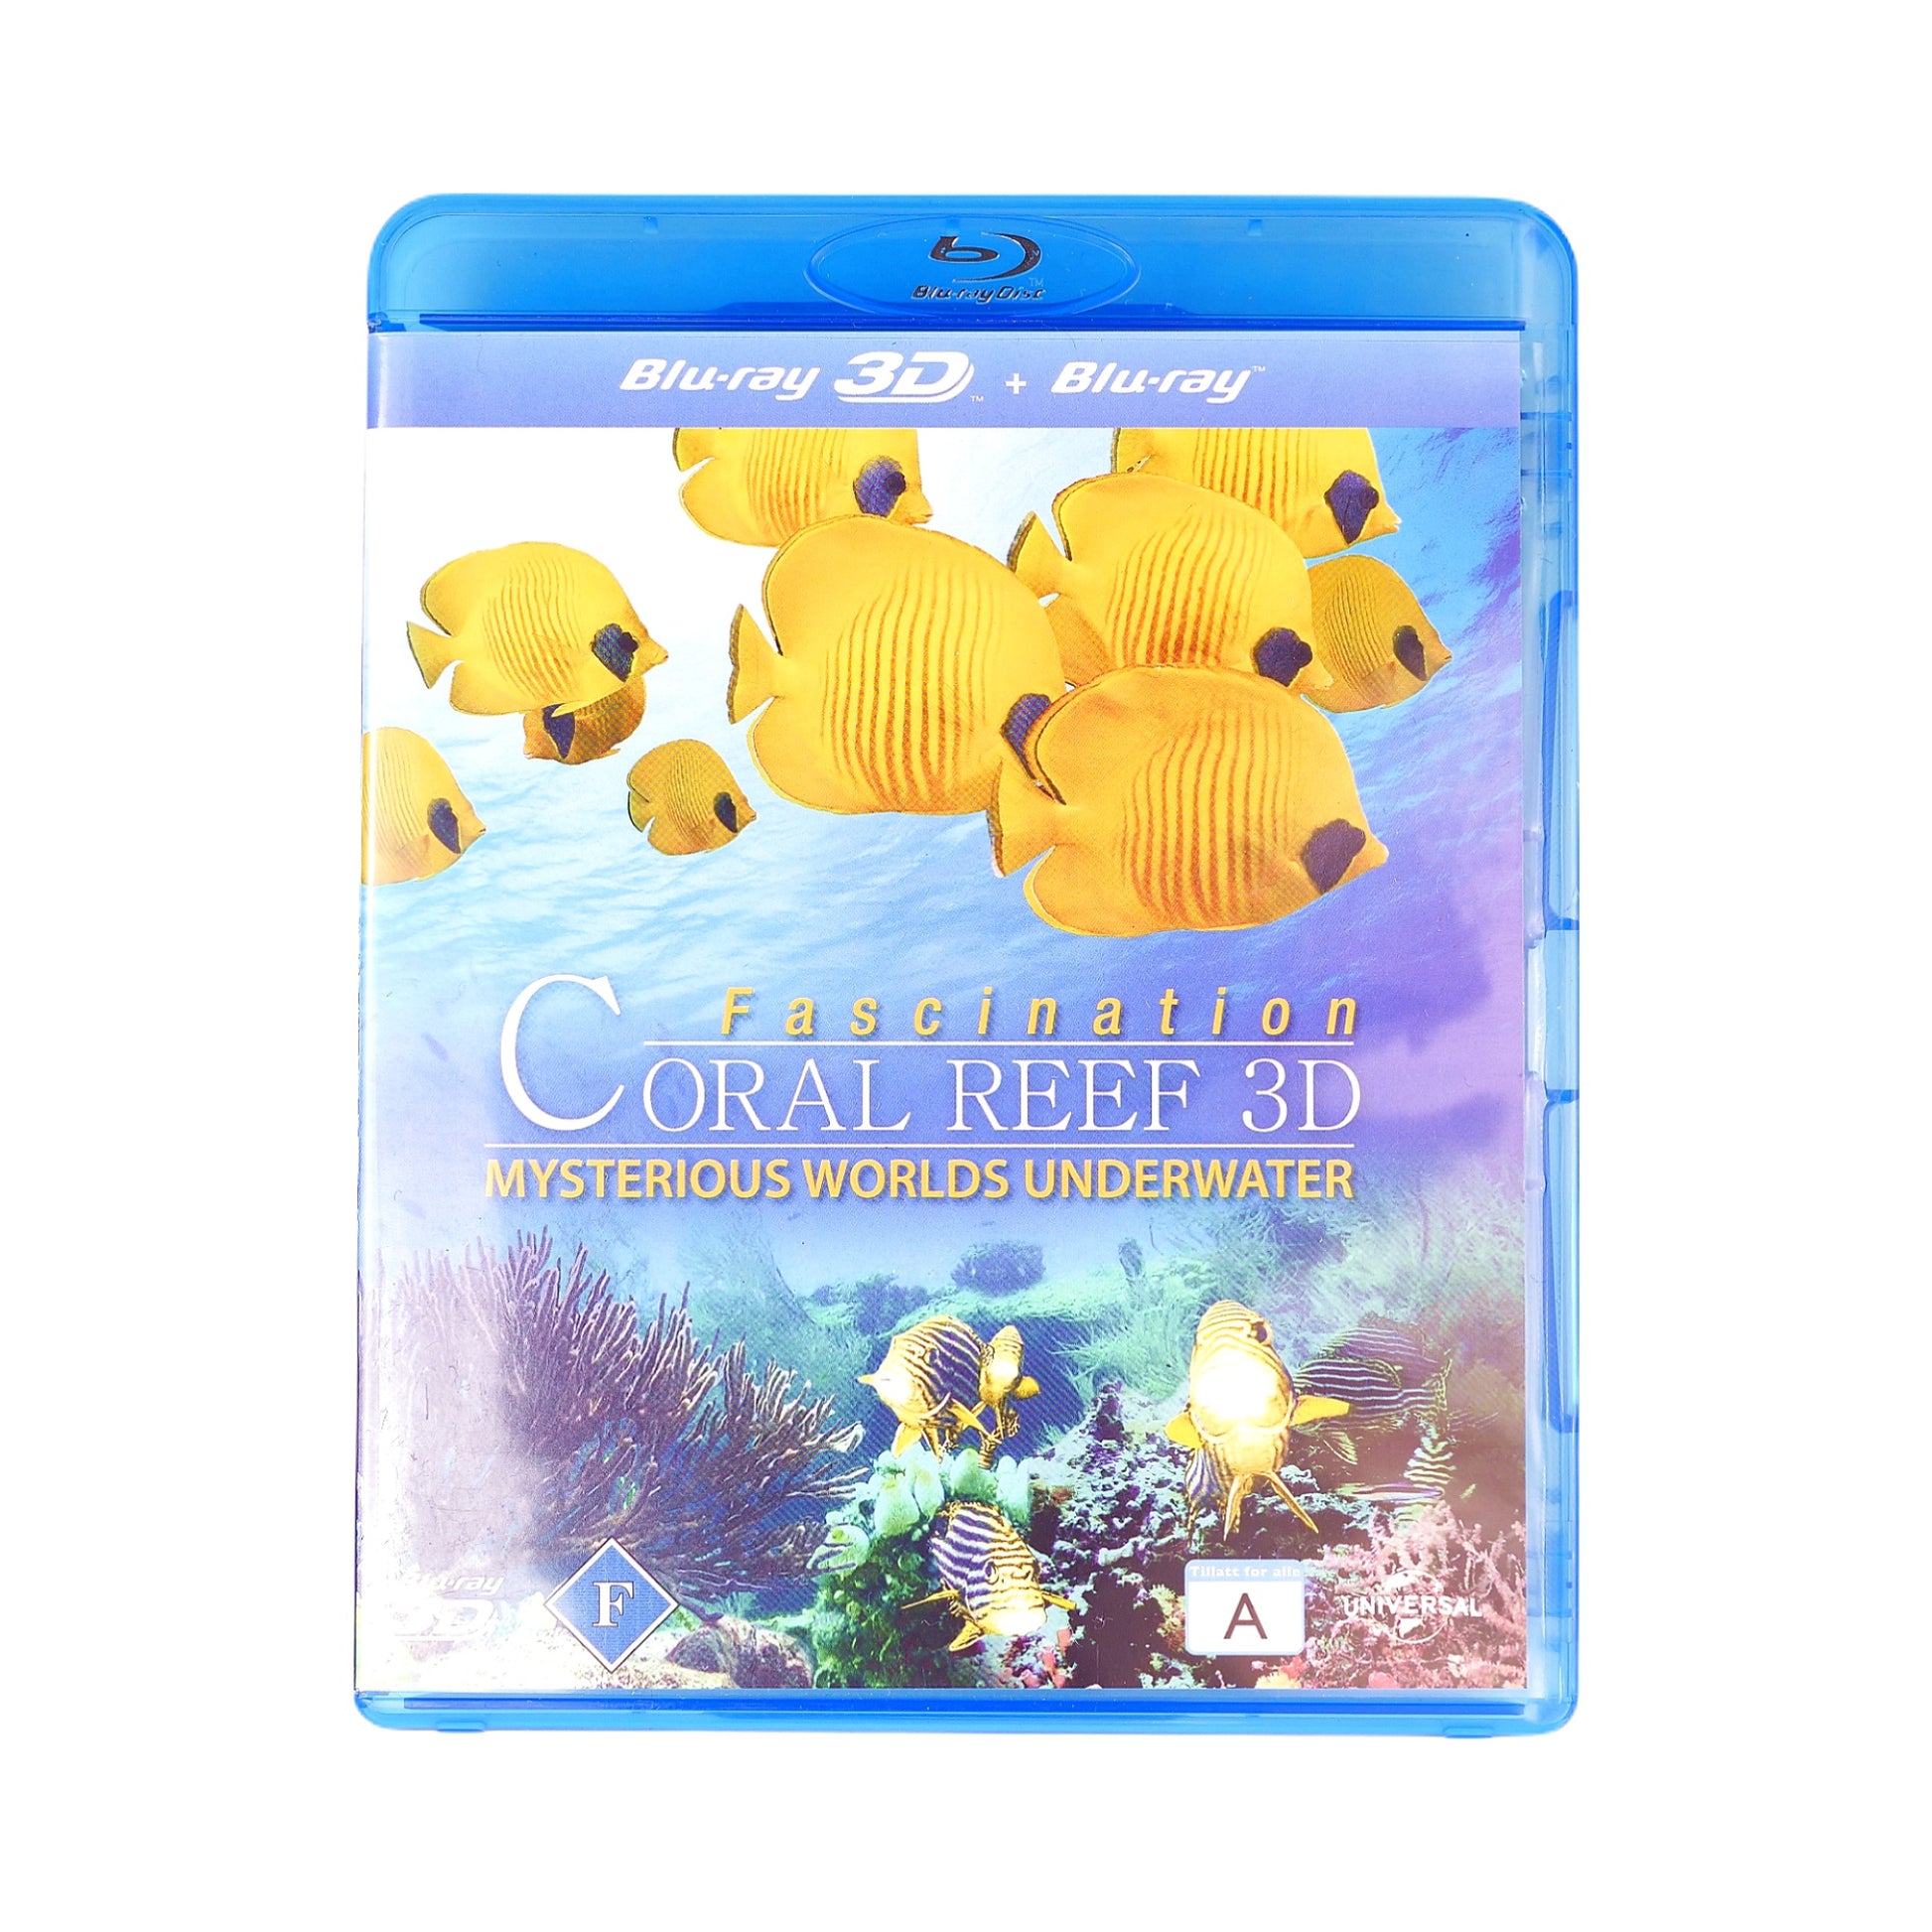 Fascination Coral Reef (2012) Mysterious Worlds Underwater - BLU-RAY 3D +  BLU-RAY 5050582932690